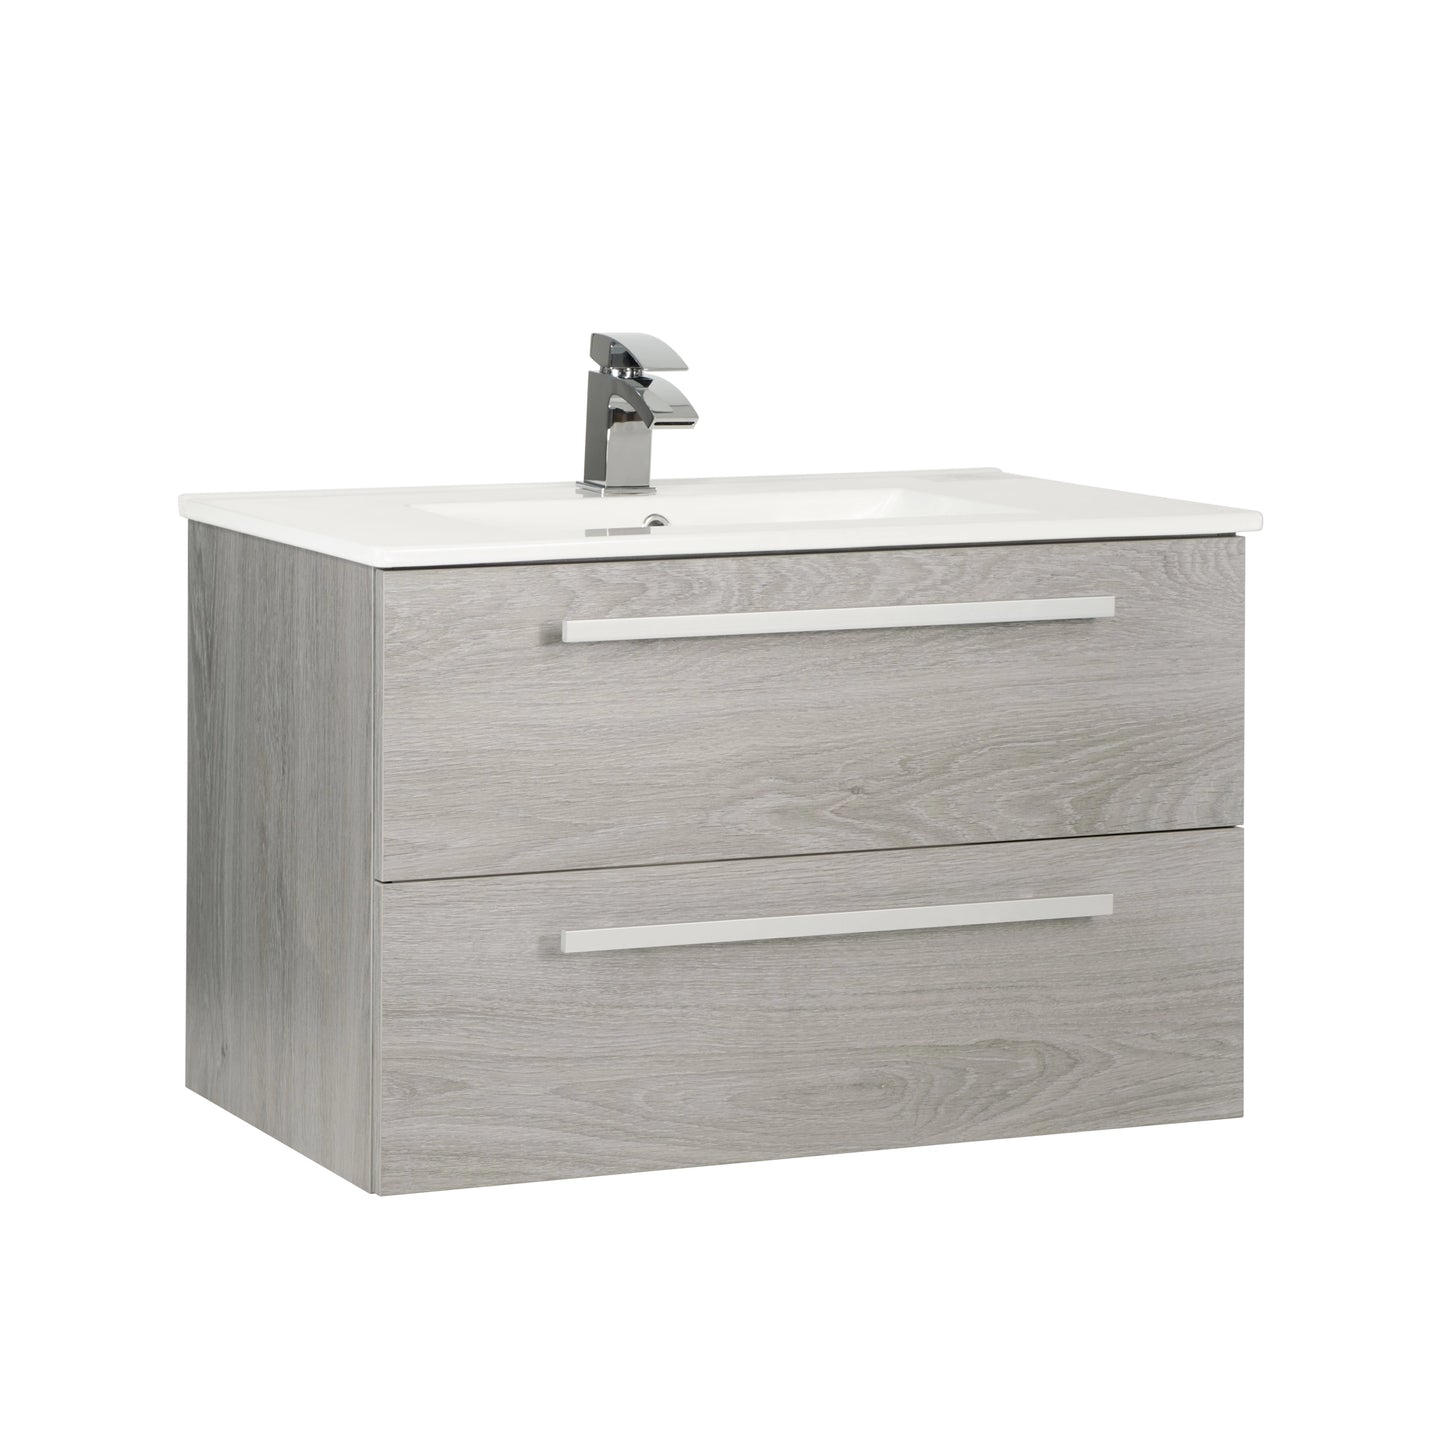 Purity Kartell Wall Mounted Two Drawer 800mm Basin Sink Vanity Unit